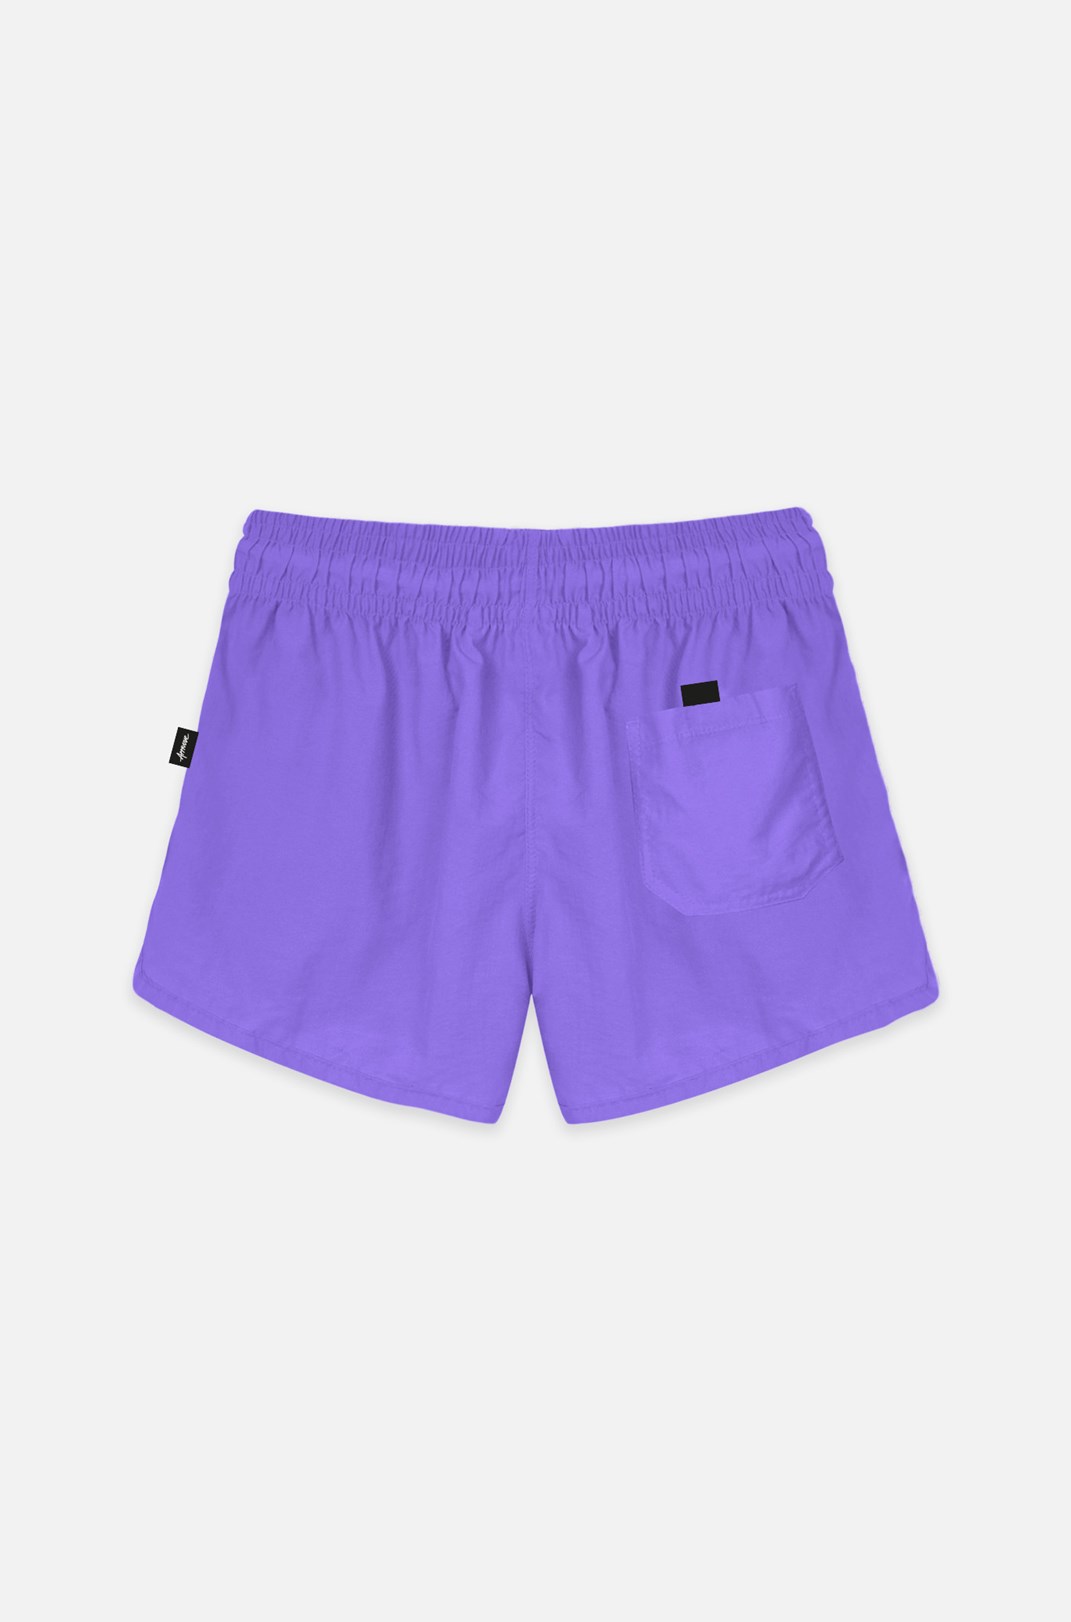 Shorts Approve Change The Planet Smile Roxo